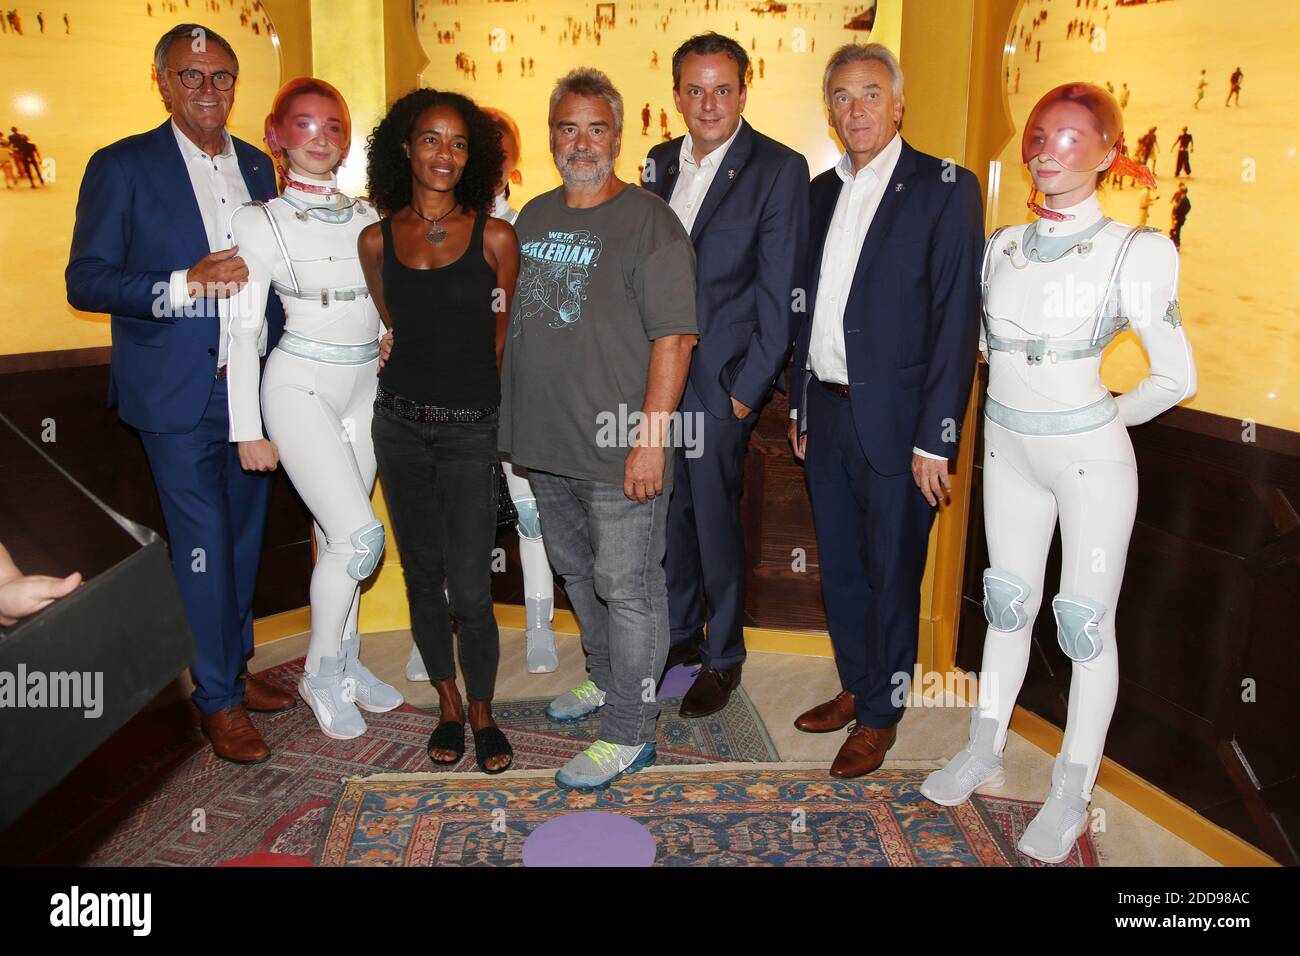 Roland Mack, Luc Besson and his wife Virginie Besson-Silla, Michael Mack and Jurgen Mack attending Eurosat - Coastiality By Valerian Opening held at Europa-Park in Rust, Germany on September 12, 2018. Photo by Jerome Domine/ABACAPRESS.COM Stock Photo